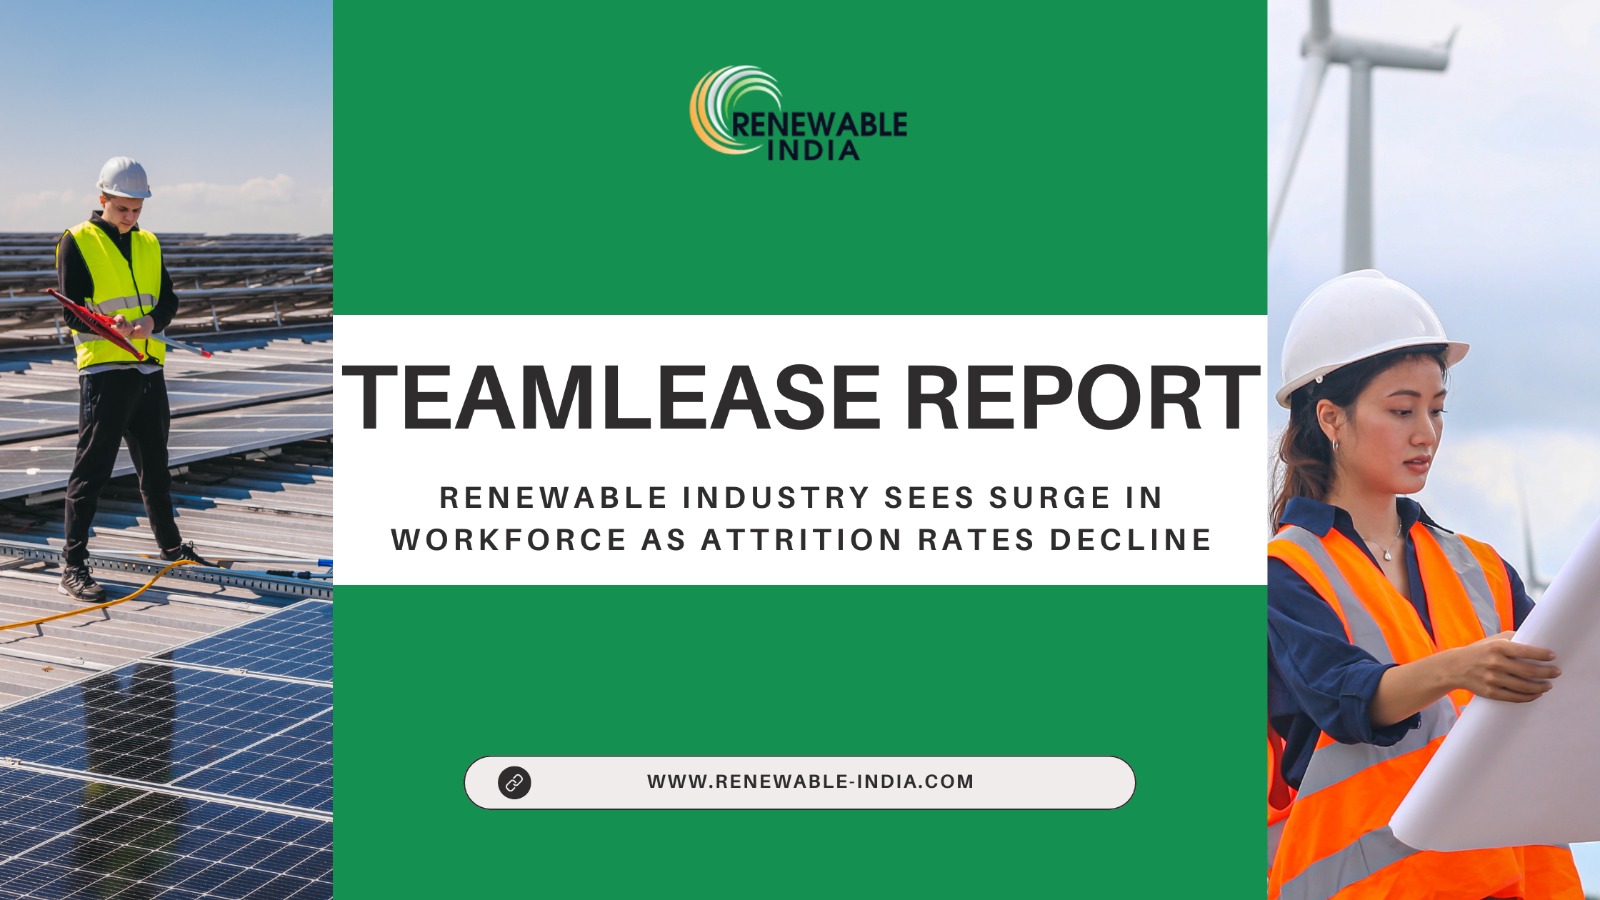 Renewable Industry Gains Momentum with Growing Workforce and Decreasing Attrition, finds Teamlease